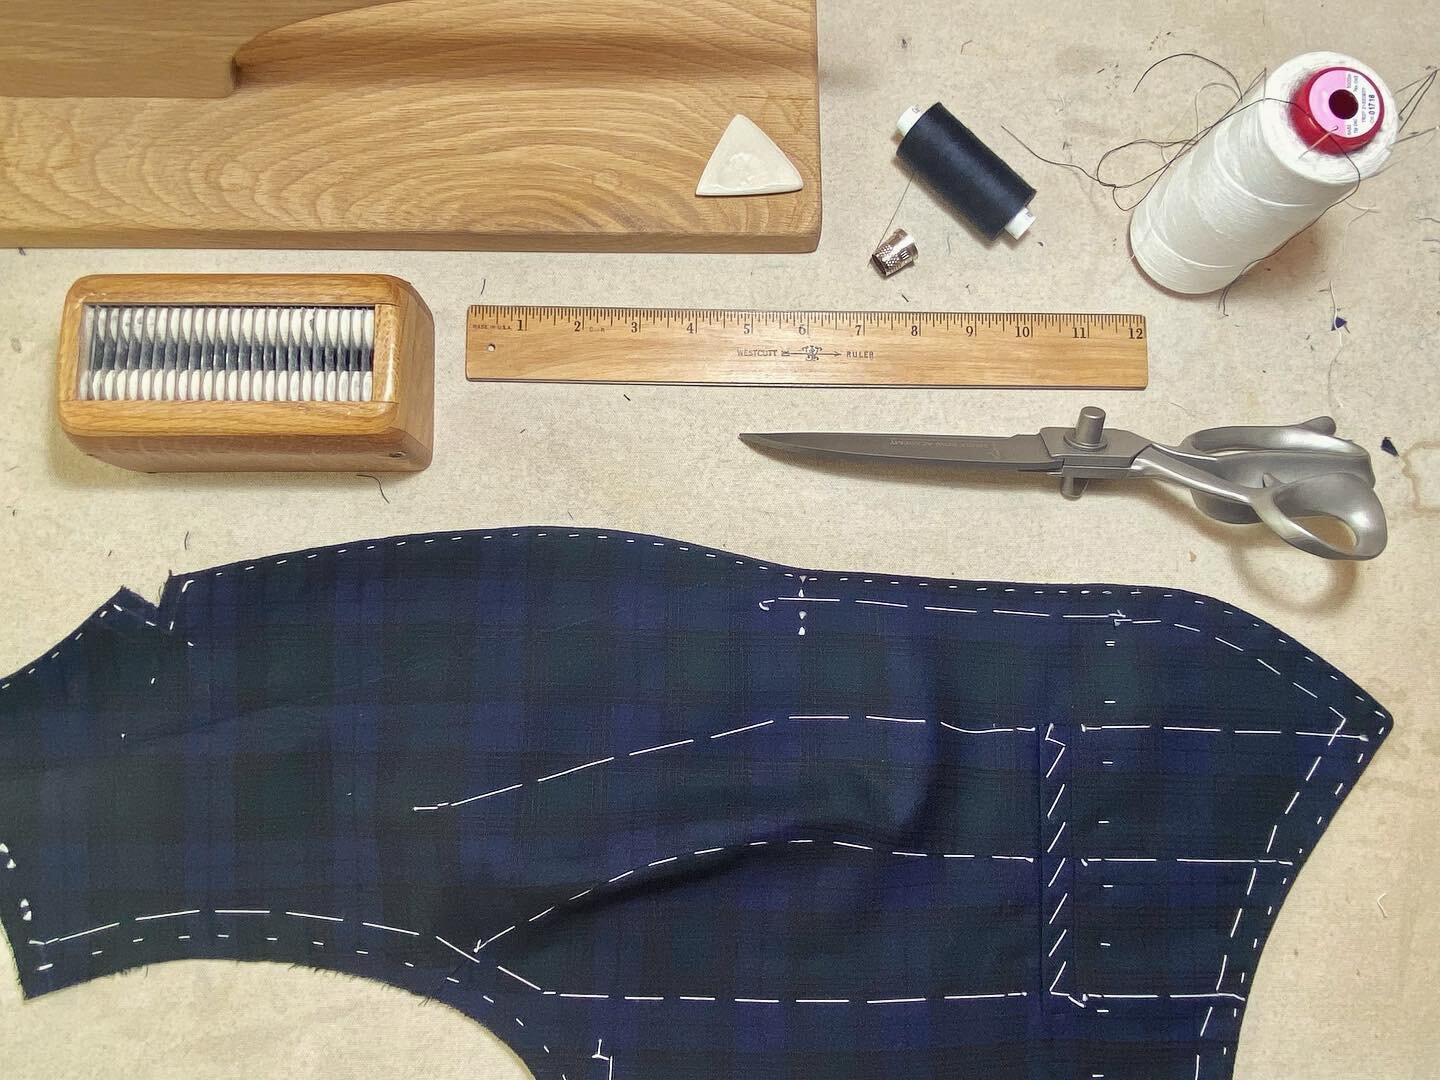 Happy Saturday! 
Who else likes spending a cloudy Saturday morning catching up on some sewing projects 😃 

#tailoring #tailormade #bespoketailoring #bespoketailor #craftersgonnacraft #craftsmanship #sewingproject #sewingaddict